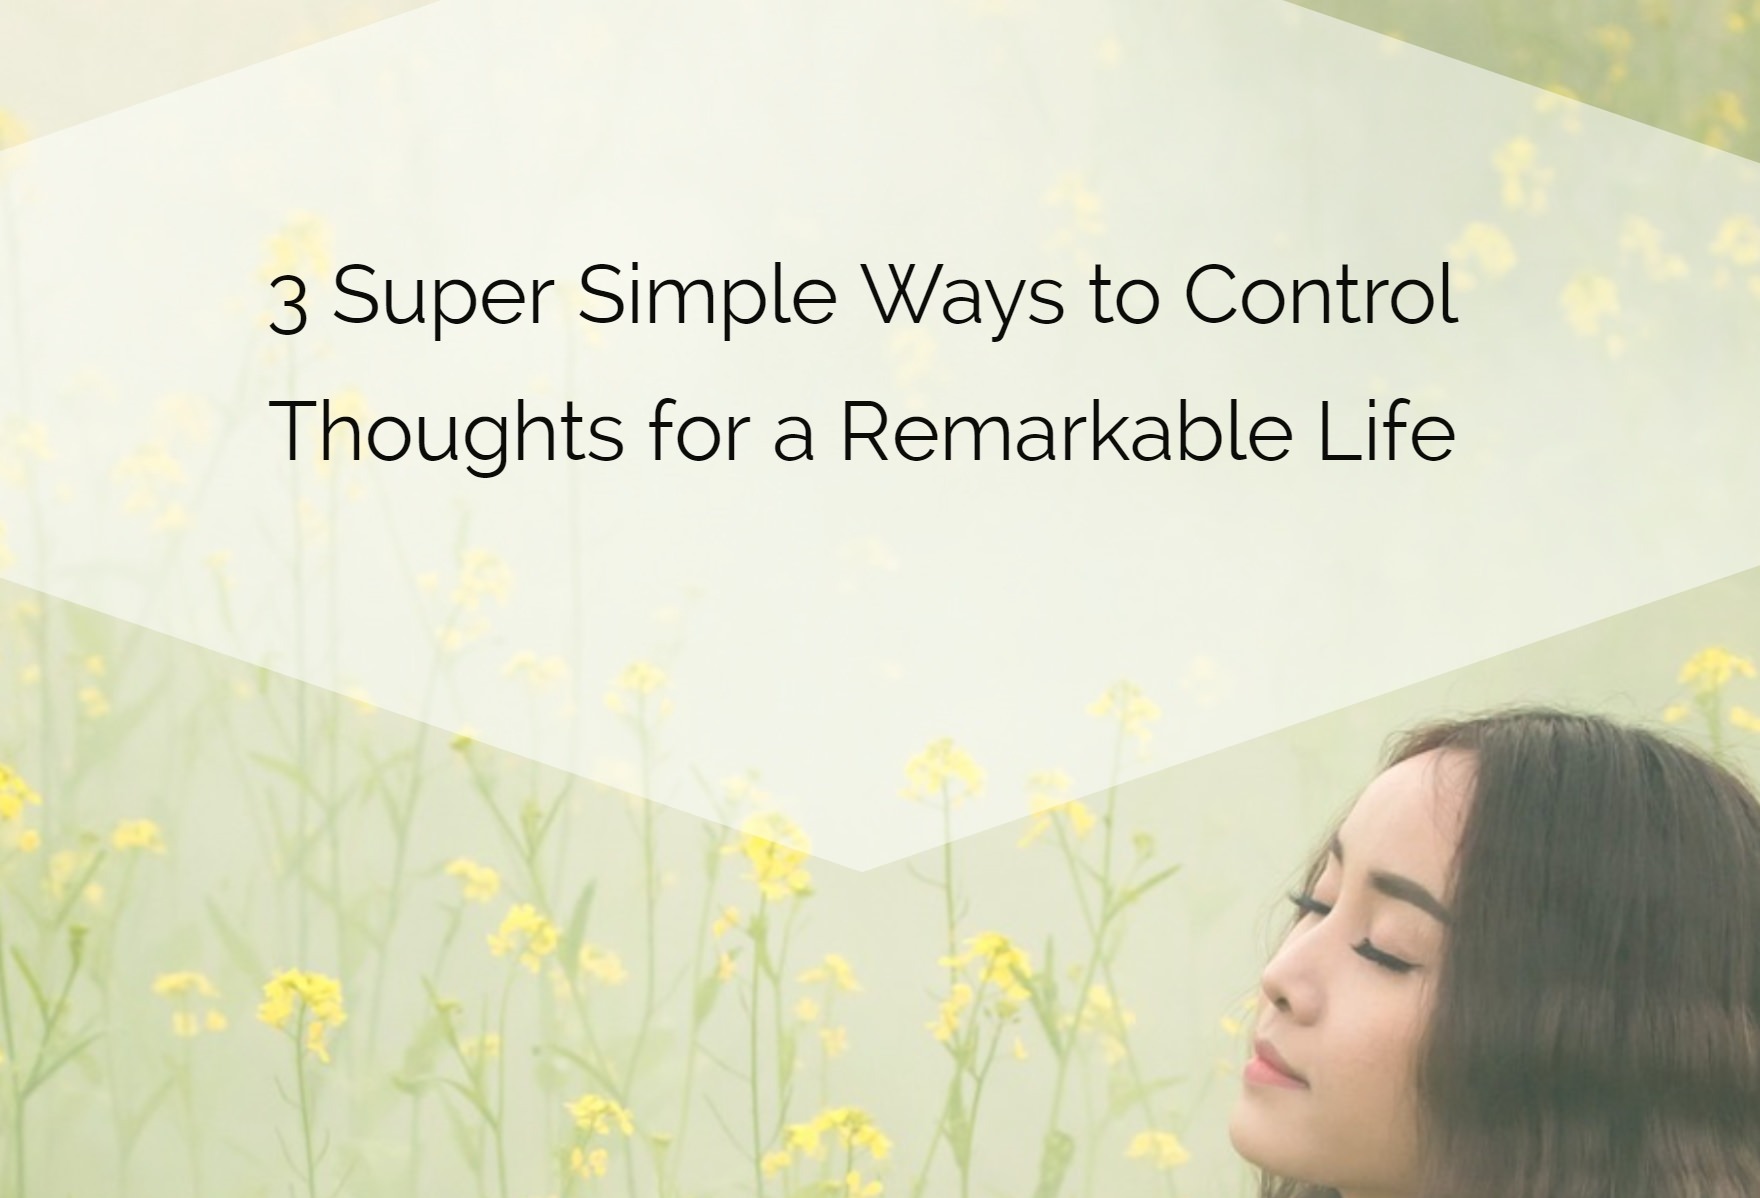 Control Your Thoughts to Control Your Life